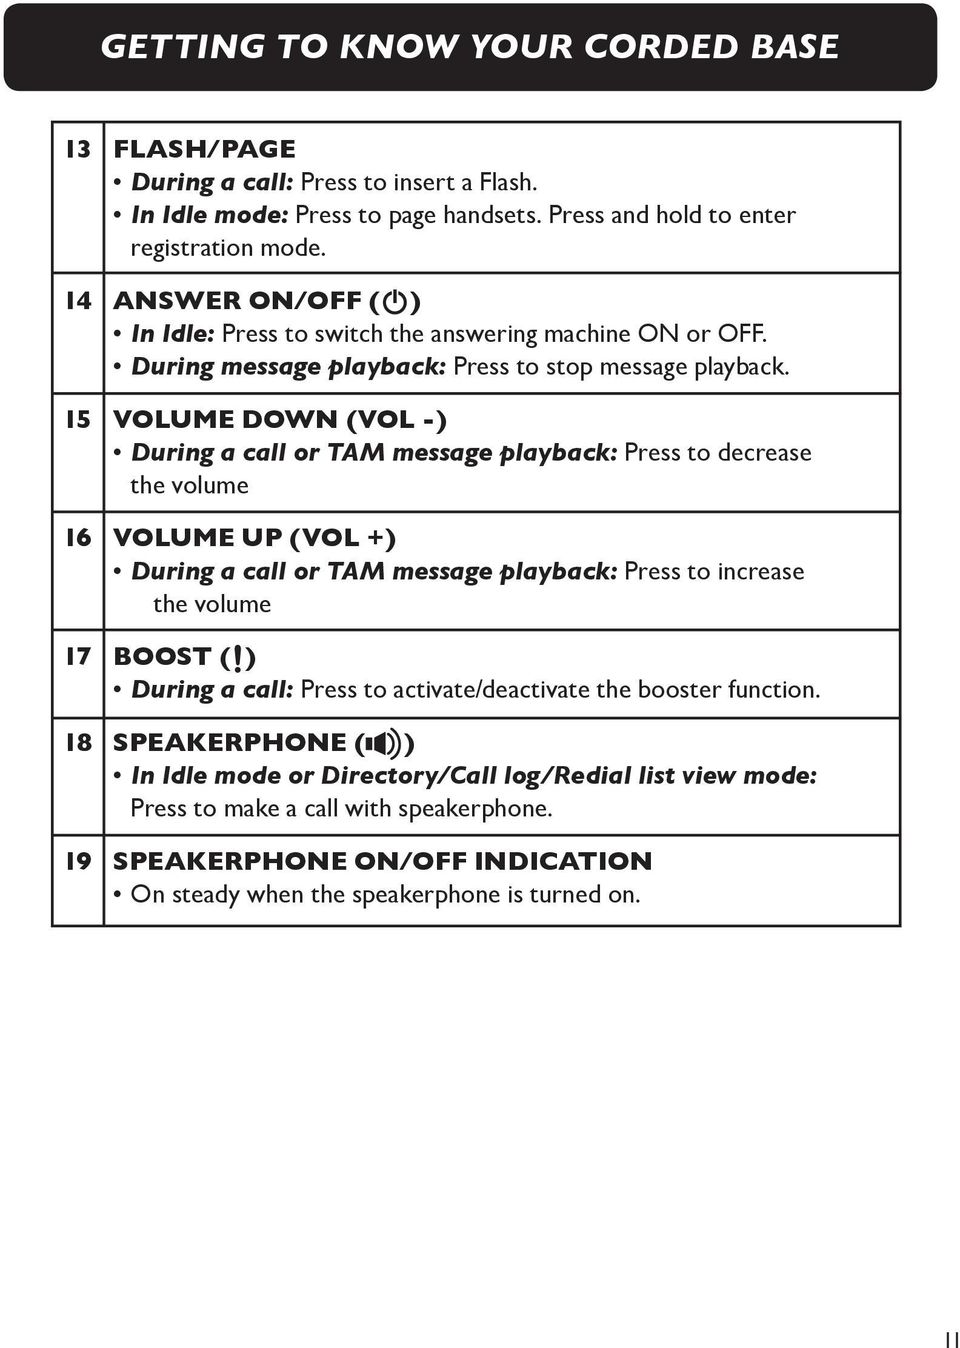 15 Volume down (VOL -) During a call or TAM message playback: Press to decrease the volume 16 Volume up (VOL +) During a call or TAM message playback: Press to increase the volume 17 boost (